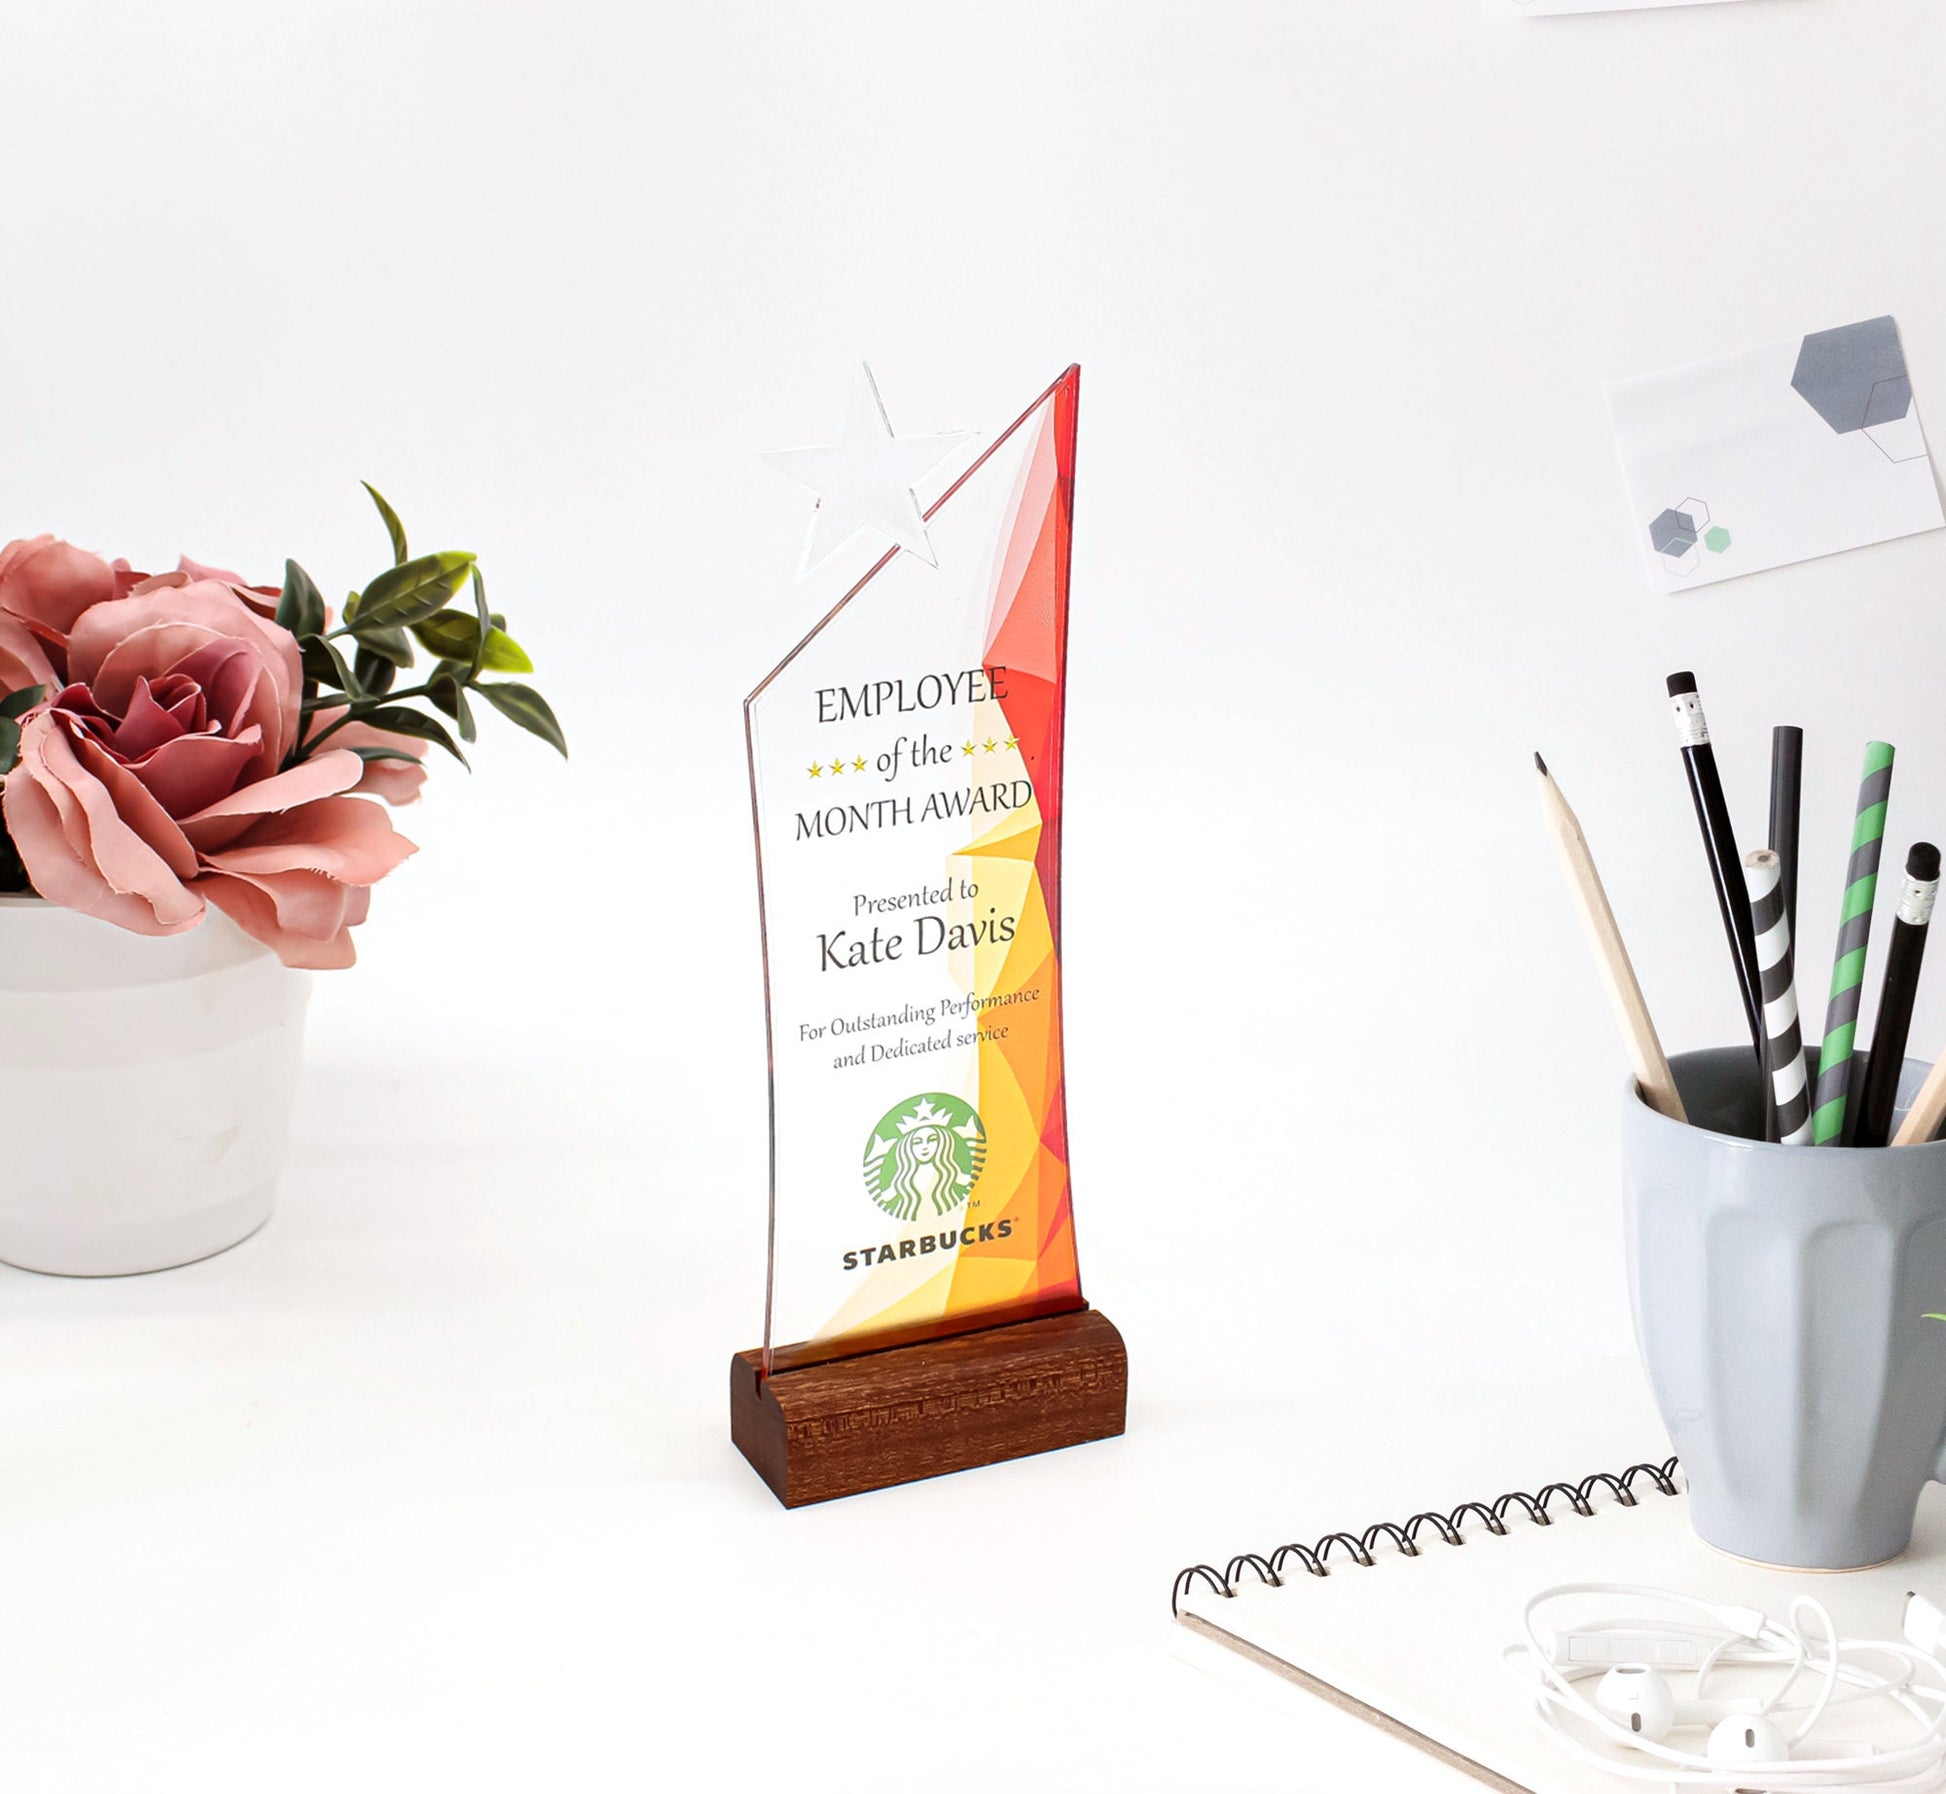 Personalized Star Employee of the Year or Month Award Engraved Glass Award Corporate Trophy Award - Company Awards Ceremony Plaque Acrylic